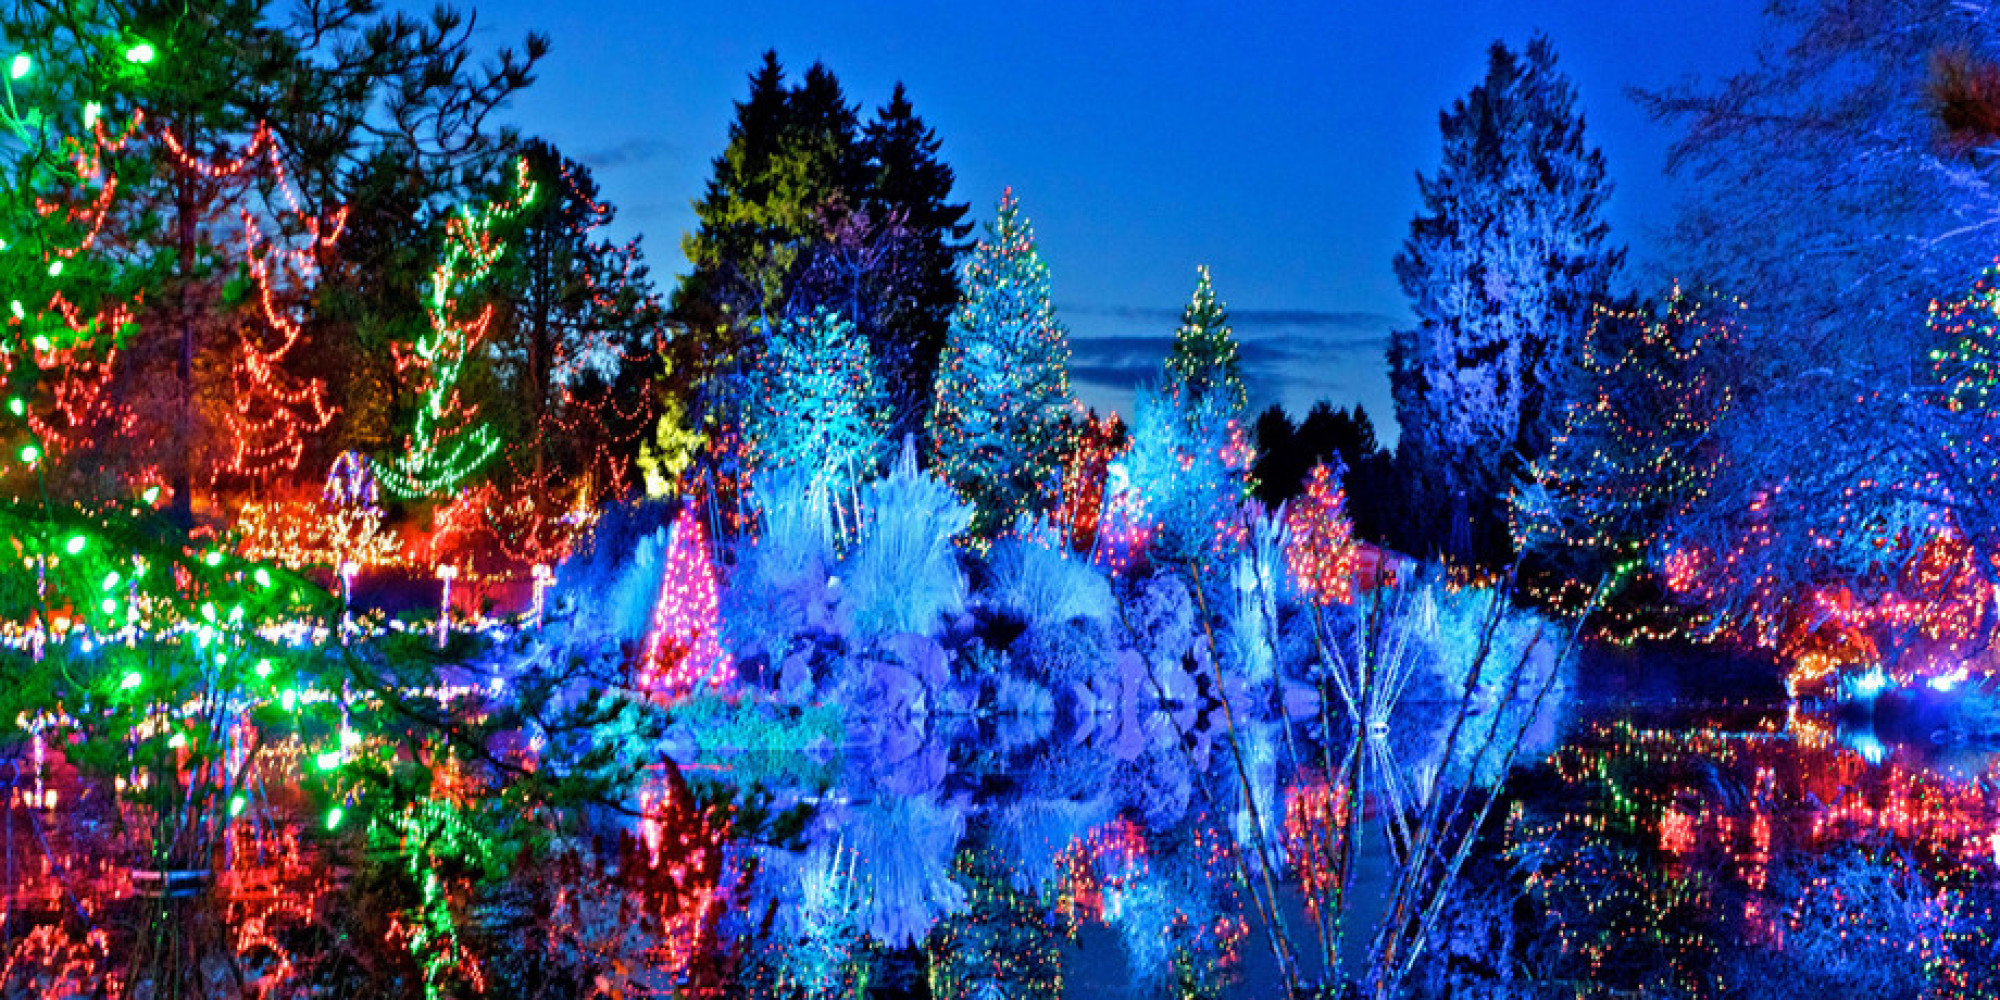 Things To Do In Vancouver: Christmas Lights (PHOTOS)